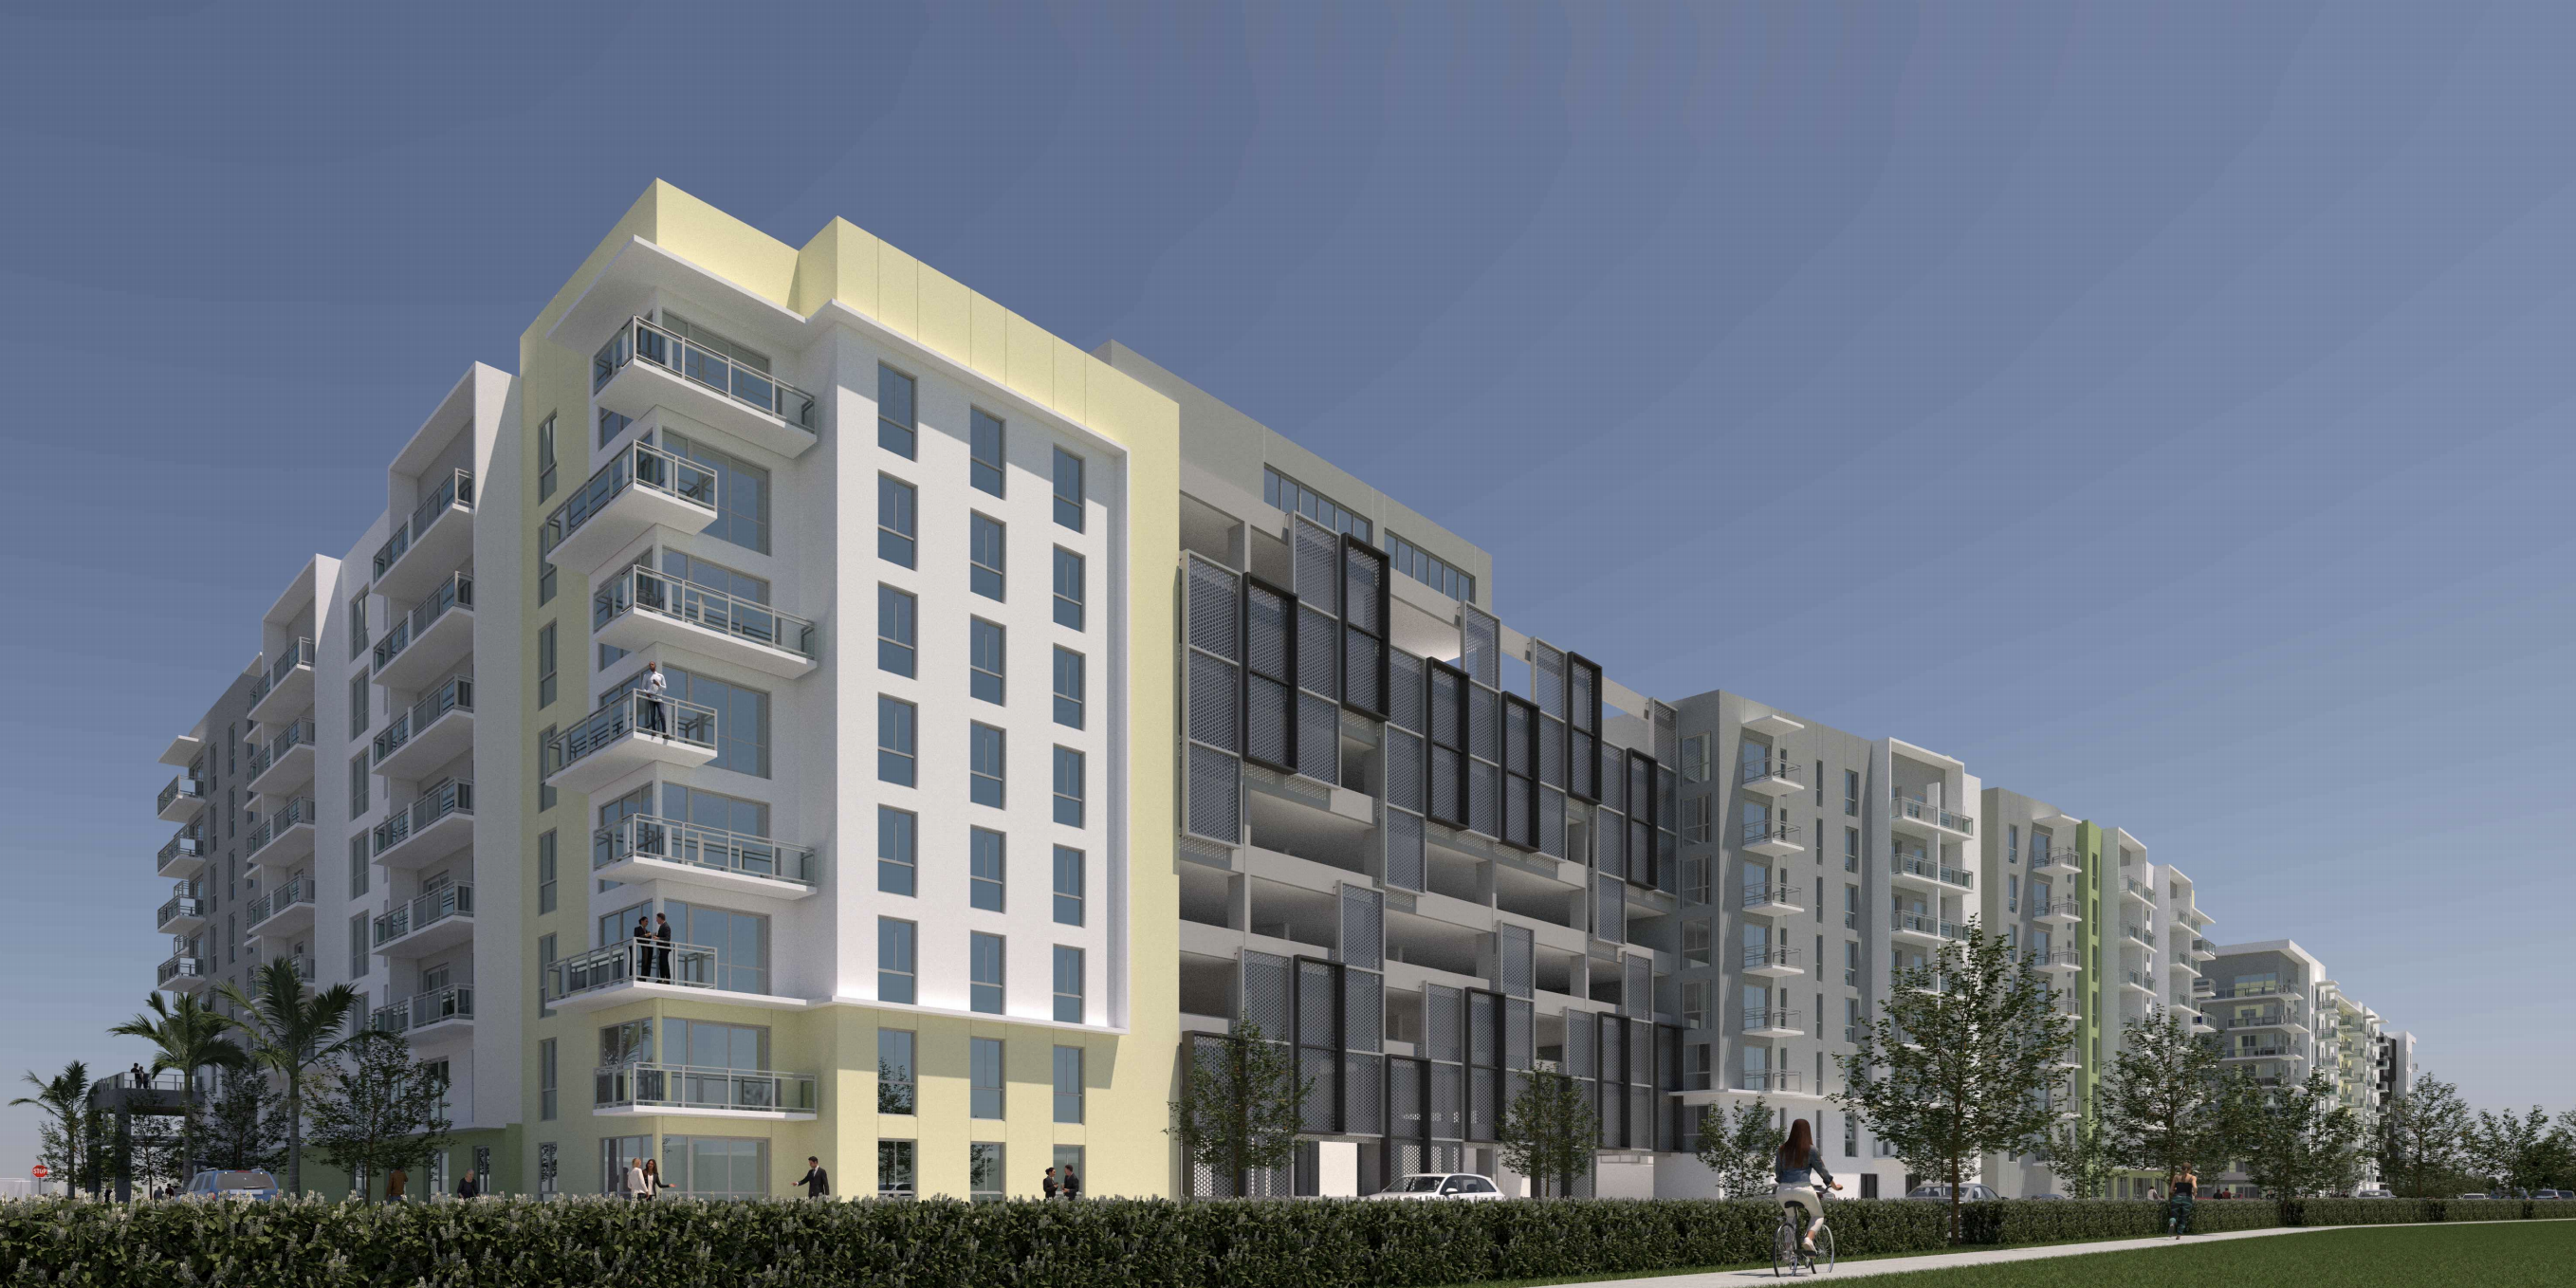 West Aventura Town Center - East Block Phase II. Designed by ATL Architecture.